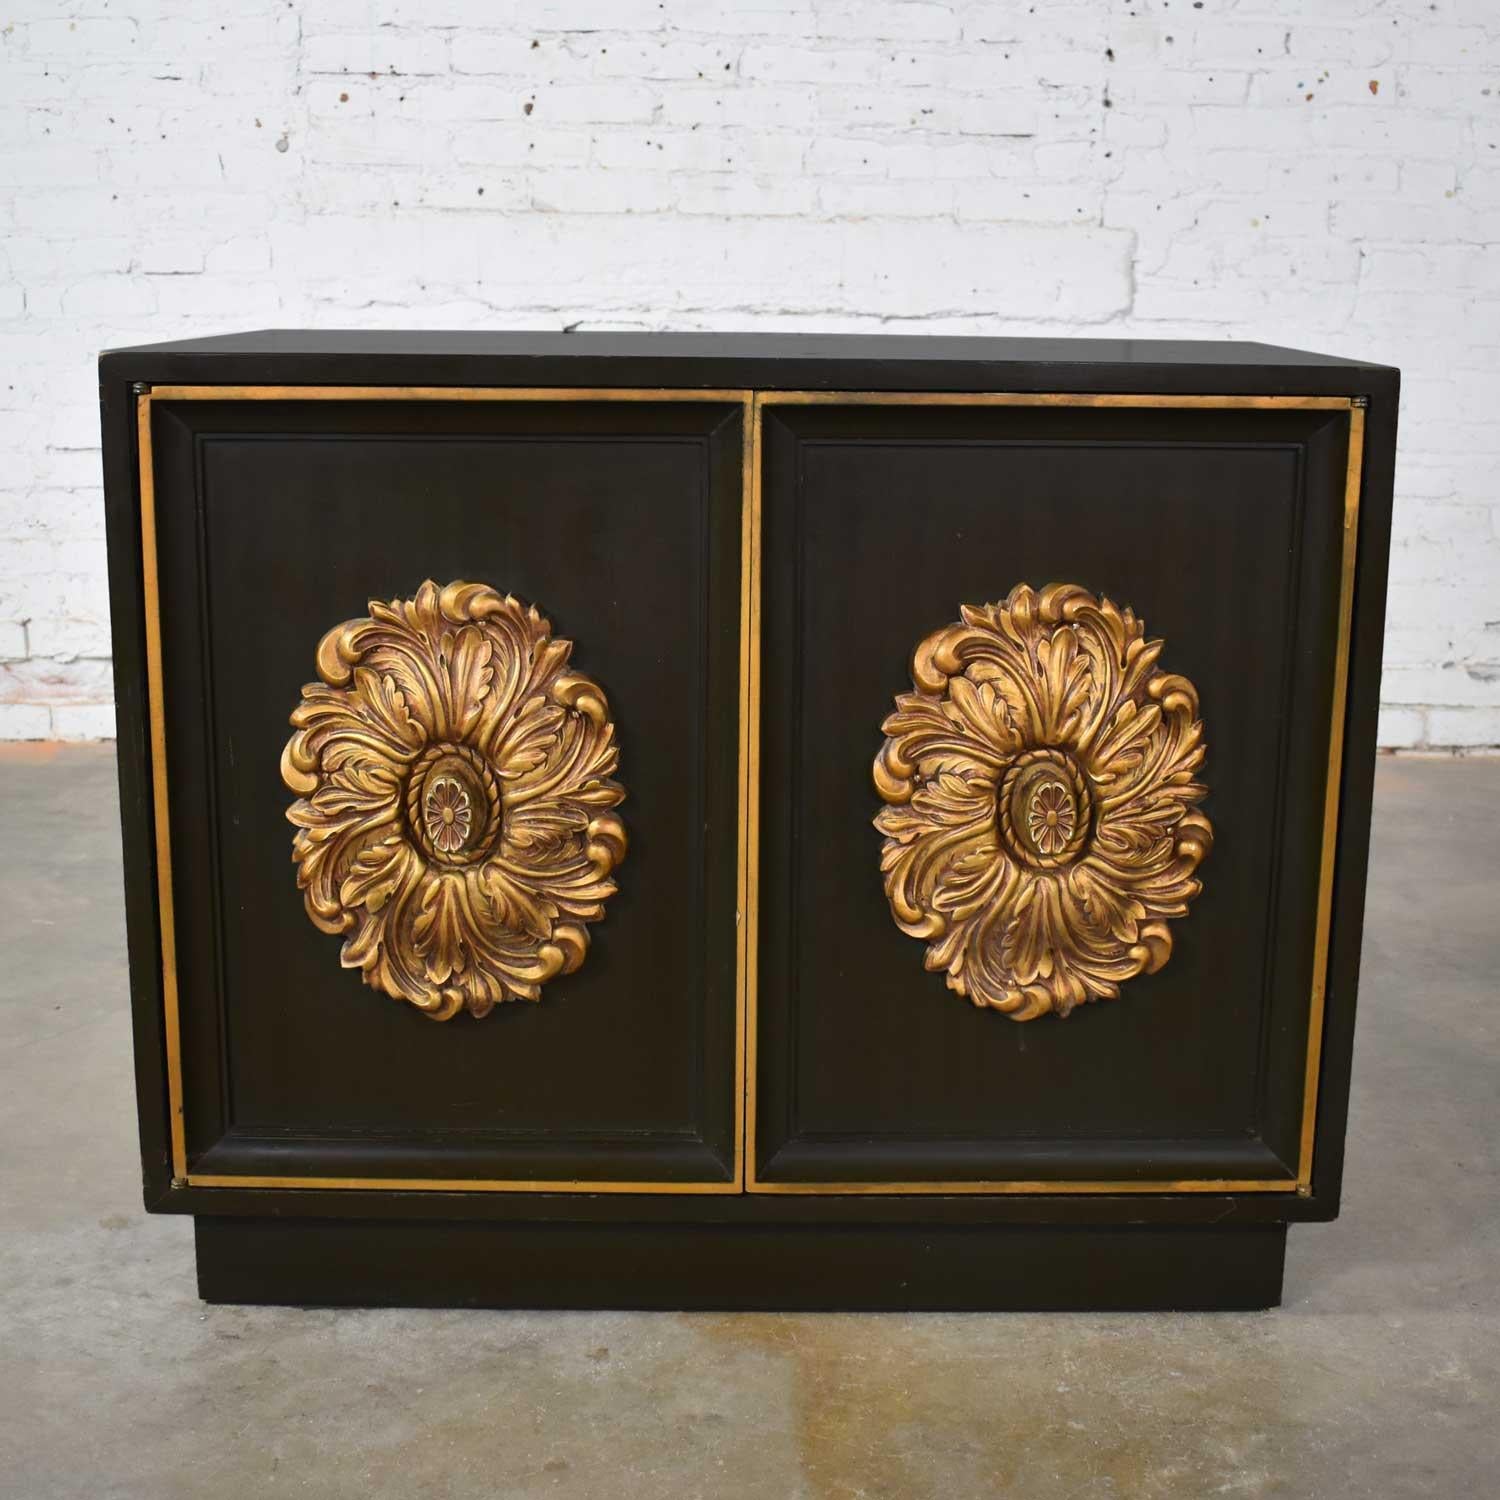 Midcentury Hollywood Regency Lane Small 2 Door Credenza Style J Mont or D Draper For Sale 6